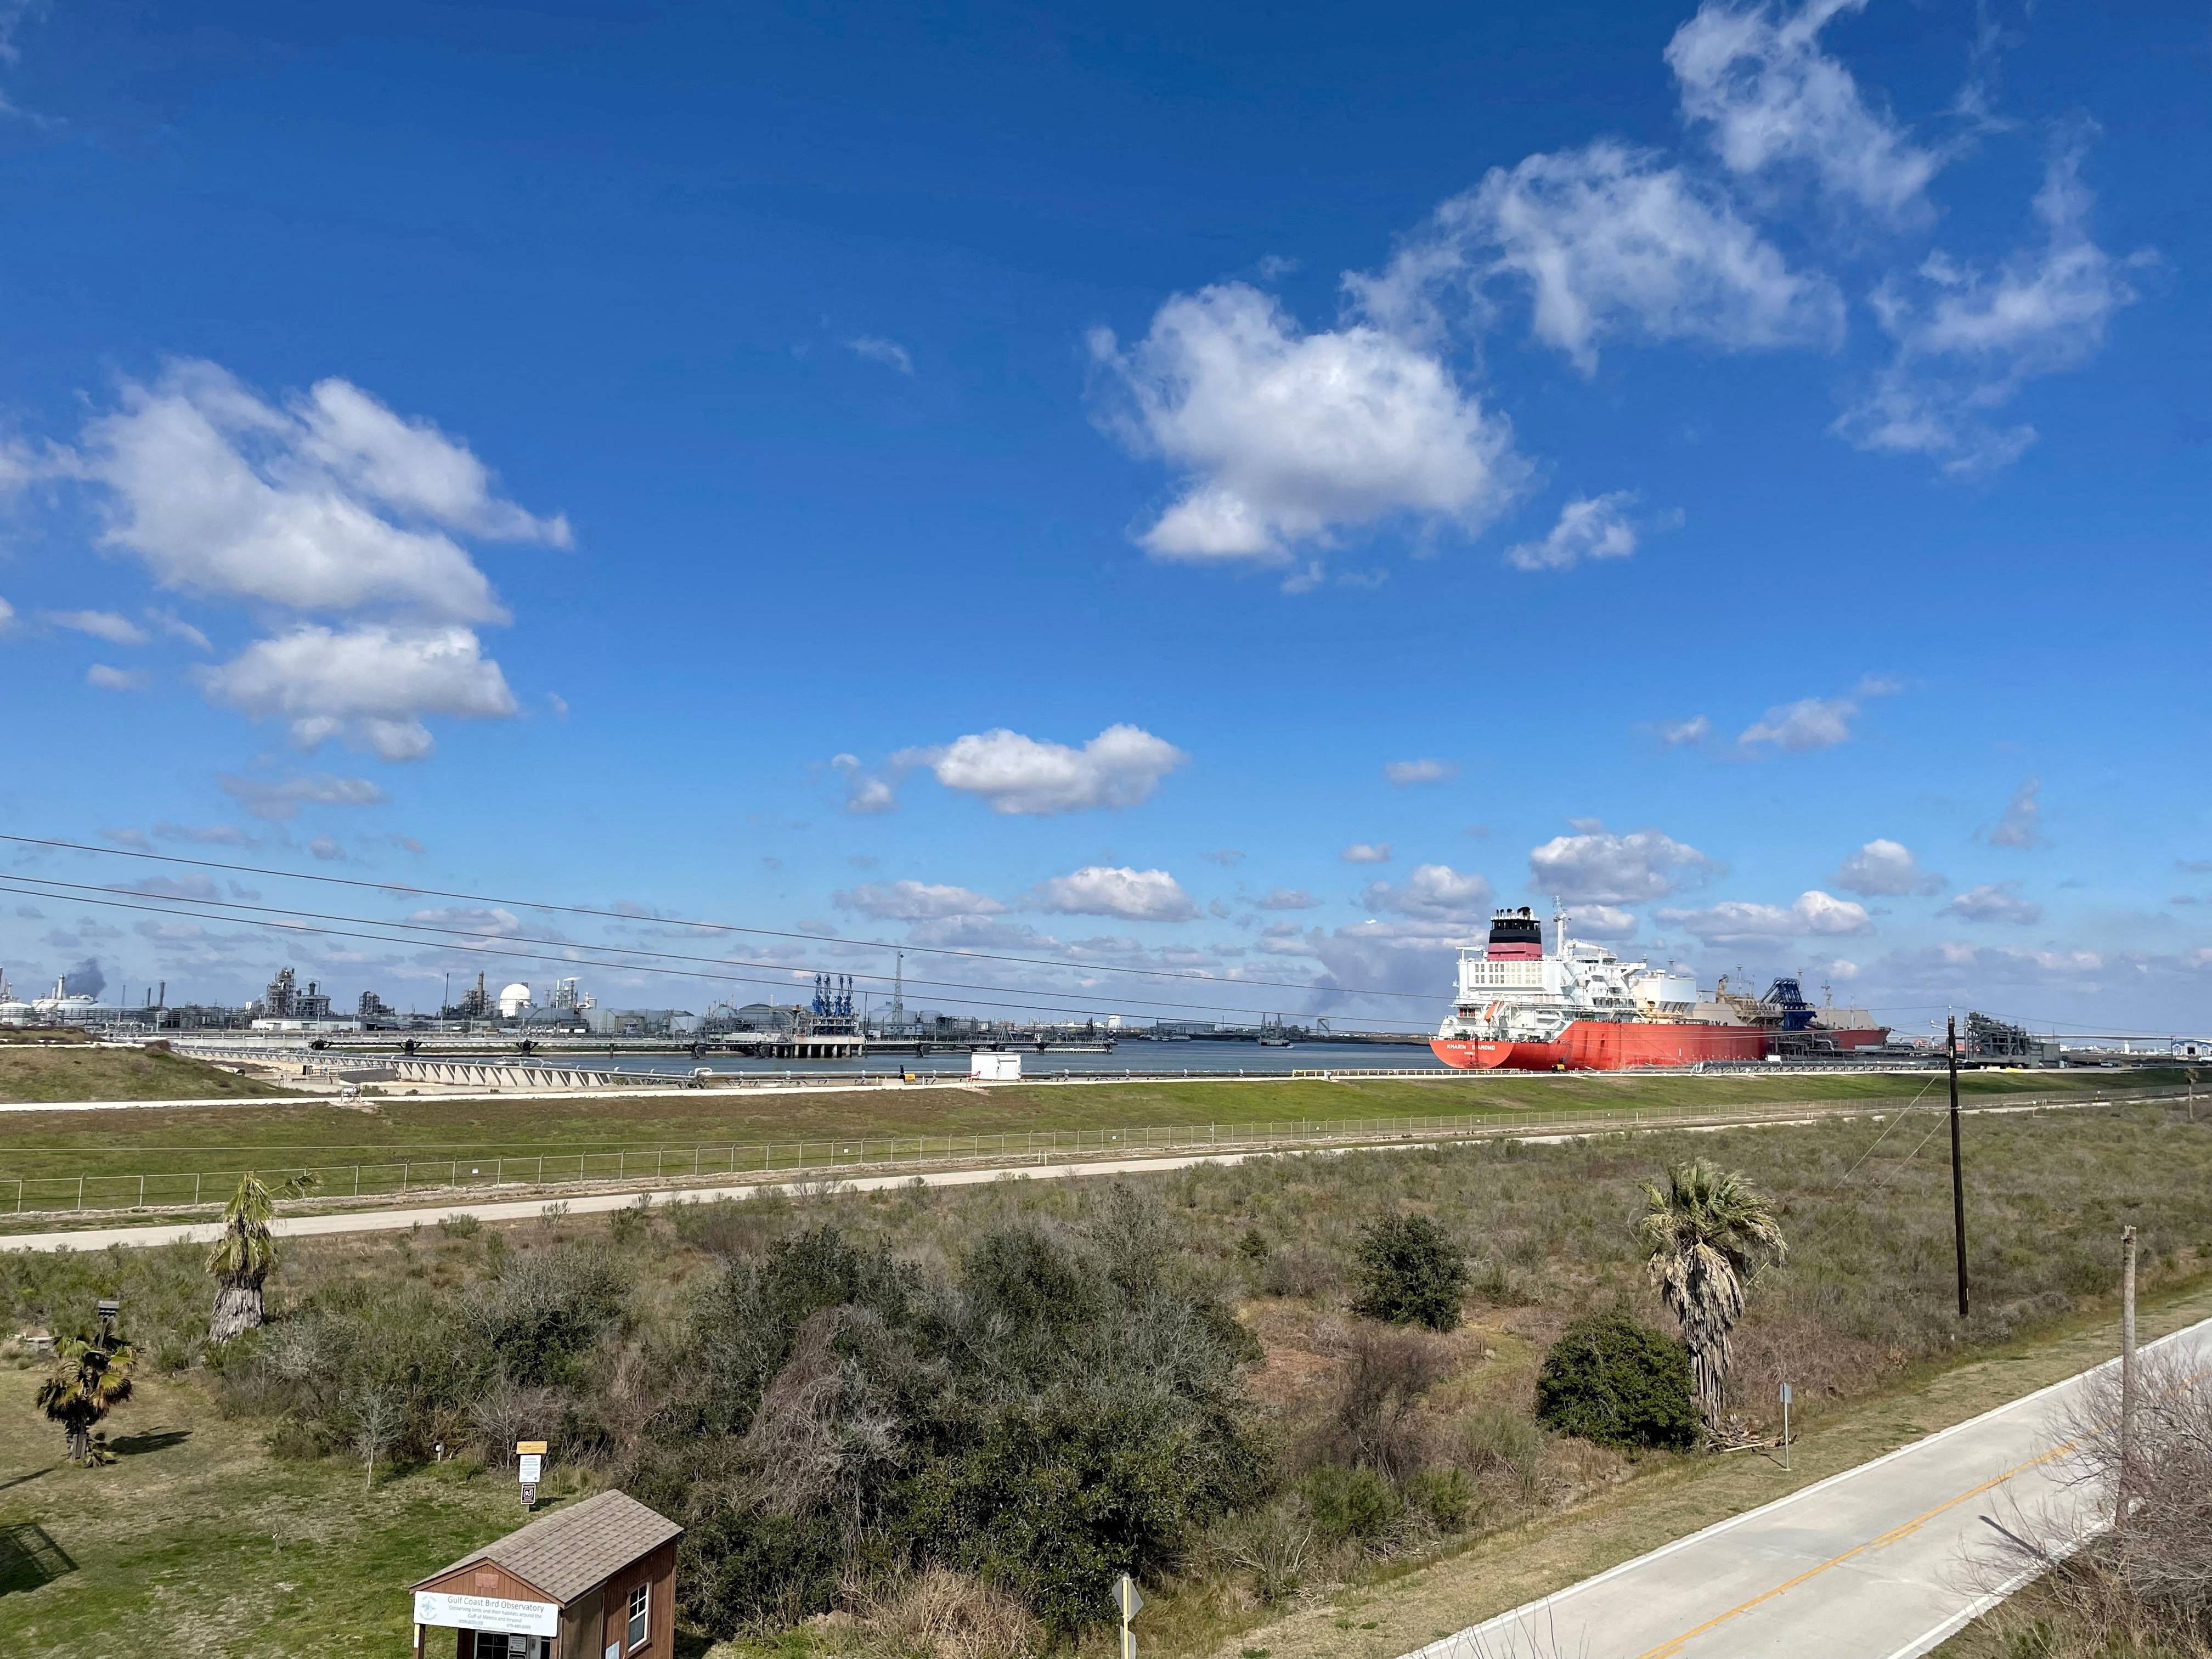 Liquefied natural gas tanker Kmarin Diamond at the Freeport LNG plant in Texas, U.S.